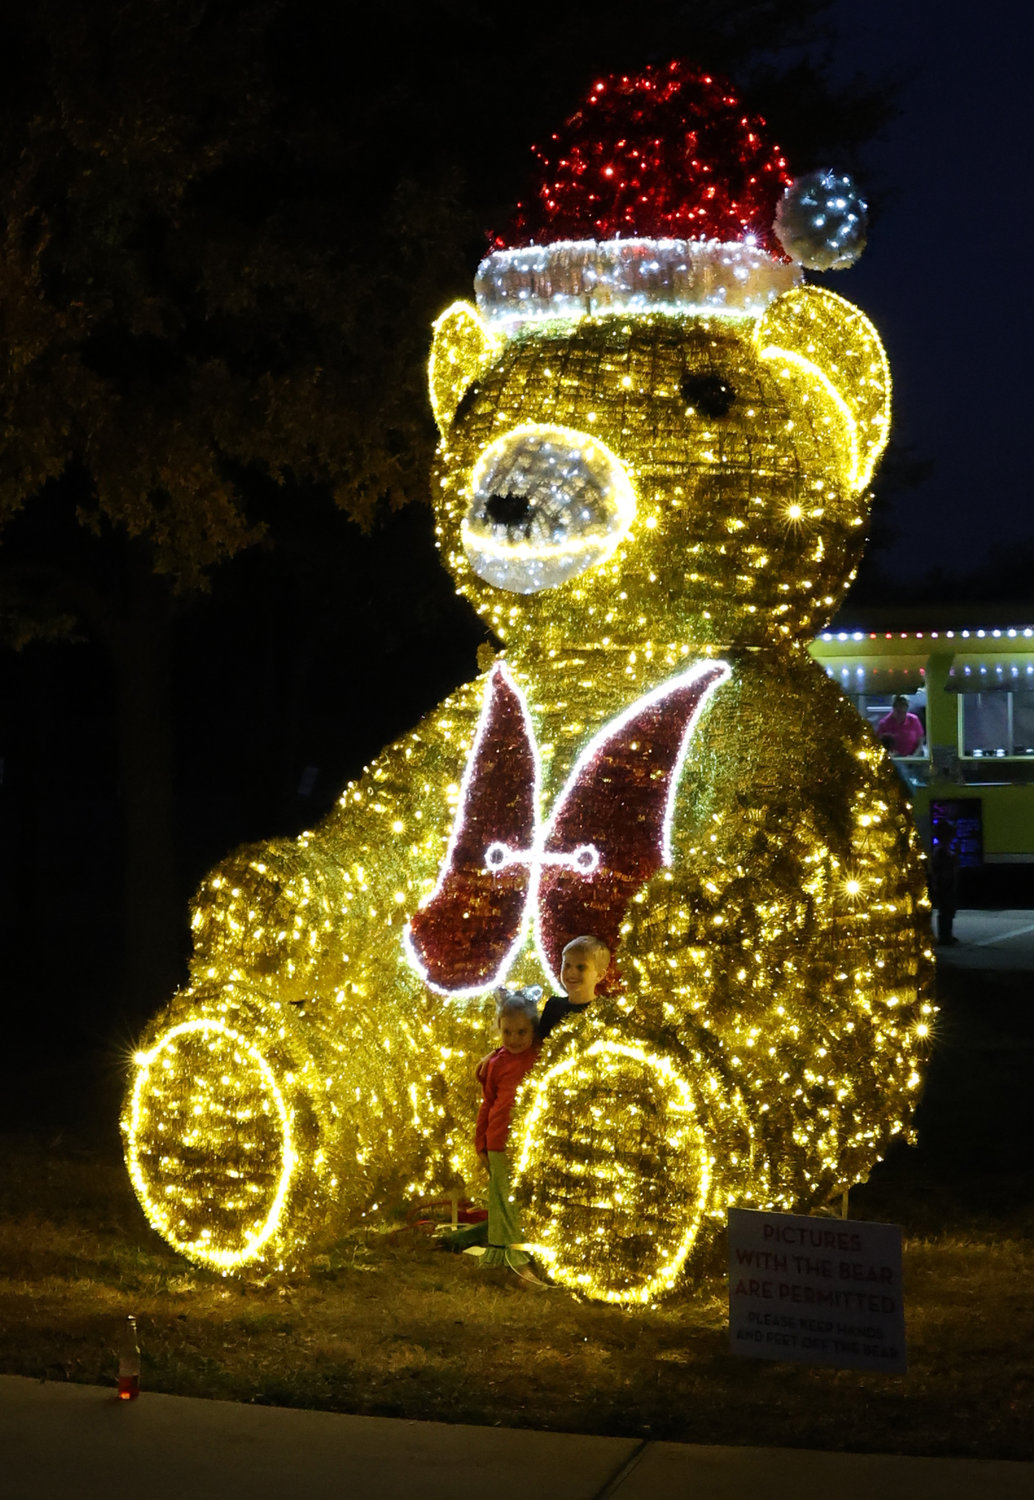 Children pose in the midst of the lighted bear.